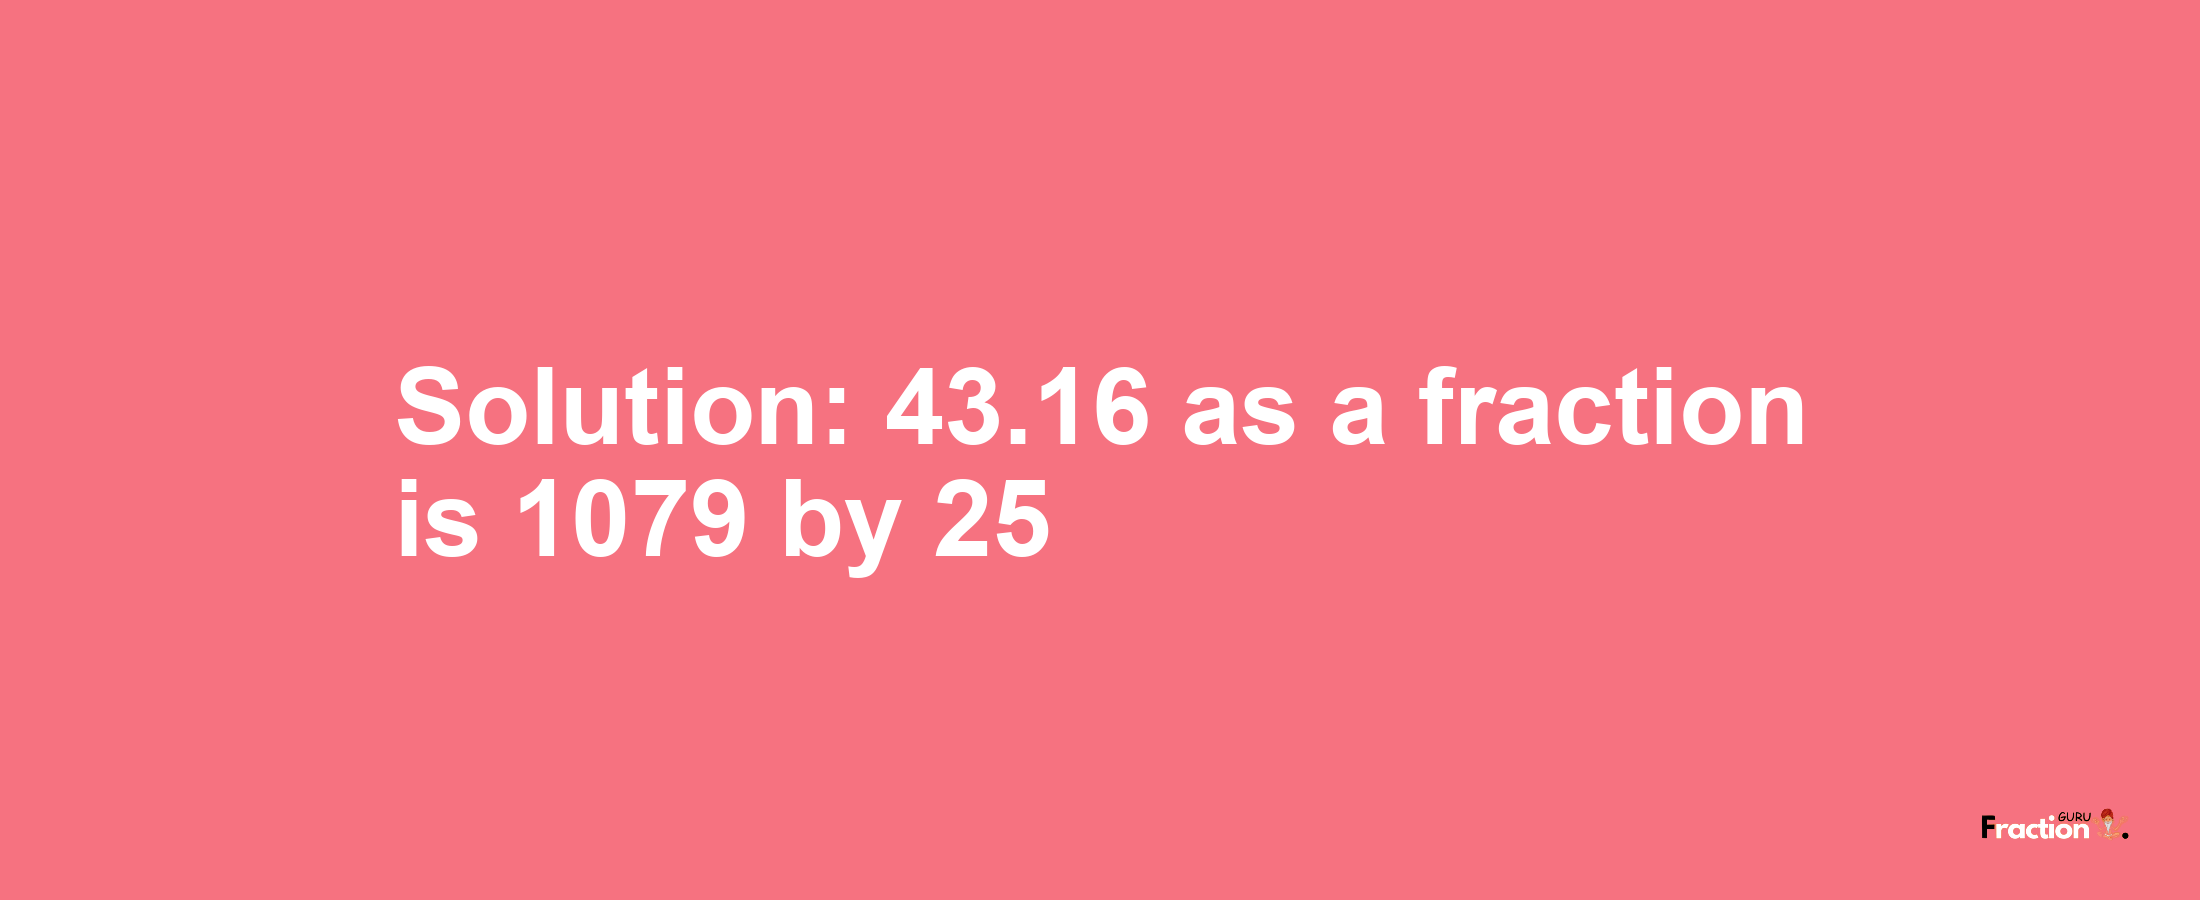 Solution:43.16 as a fraction is 1079/25